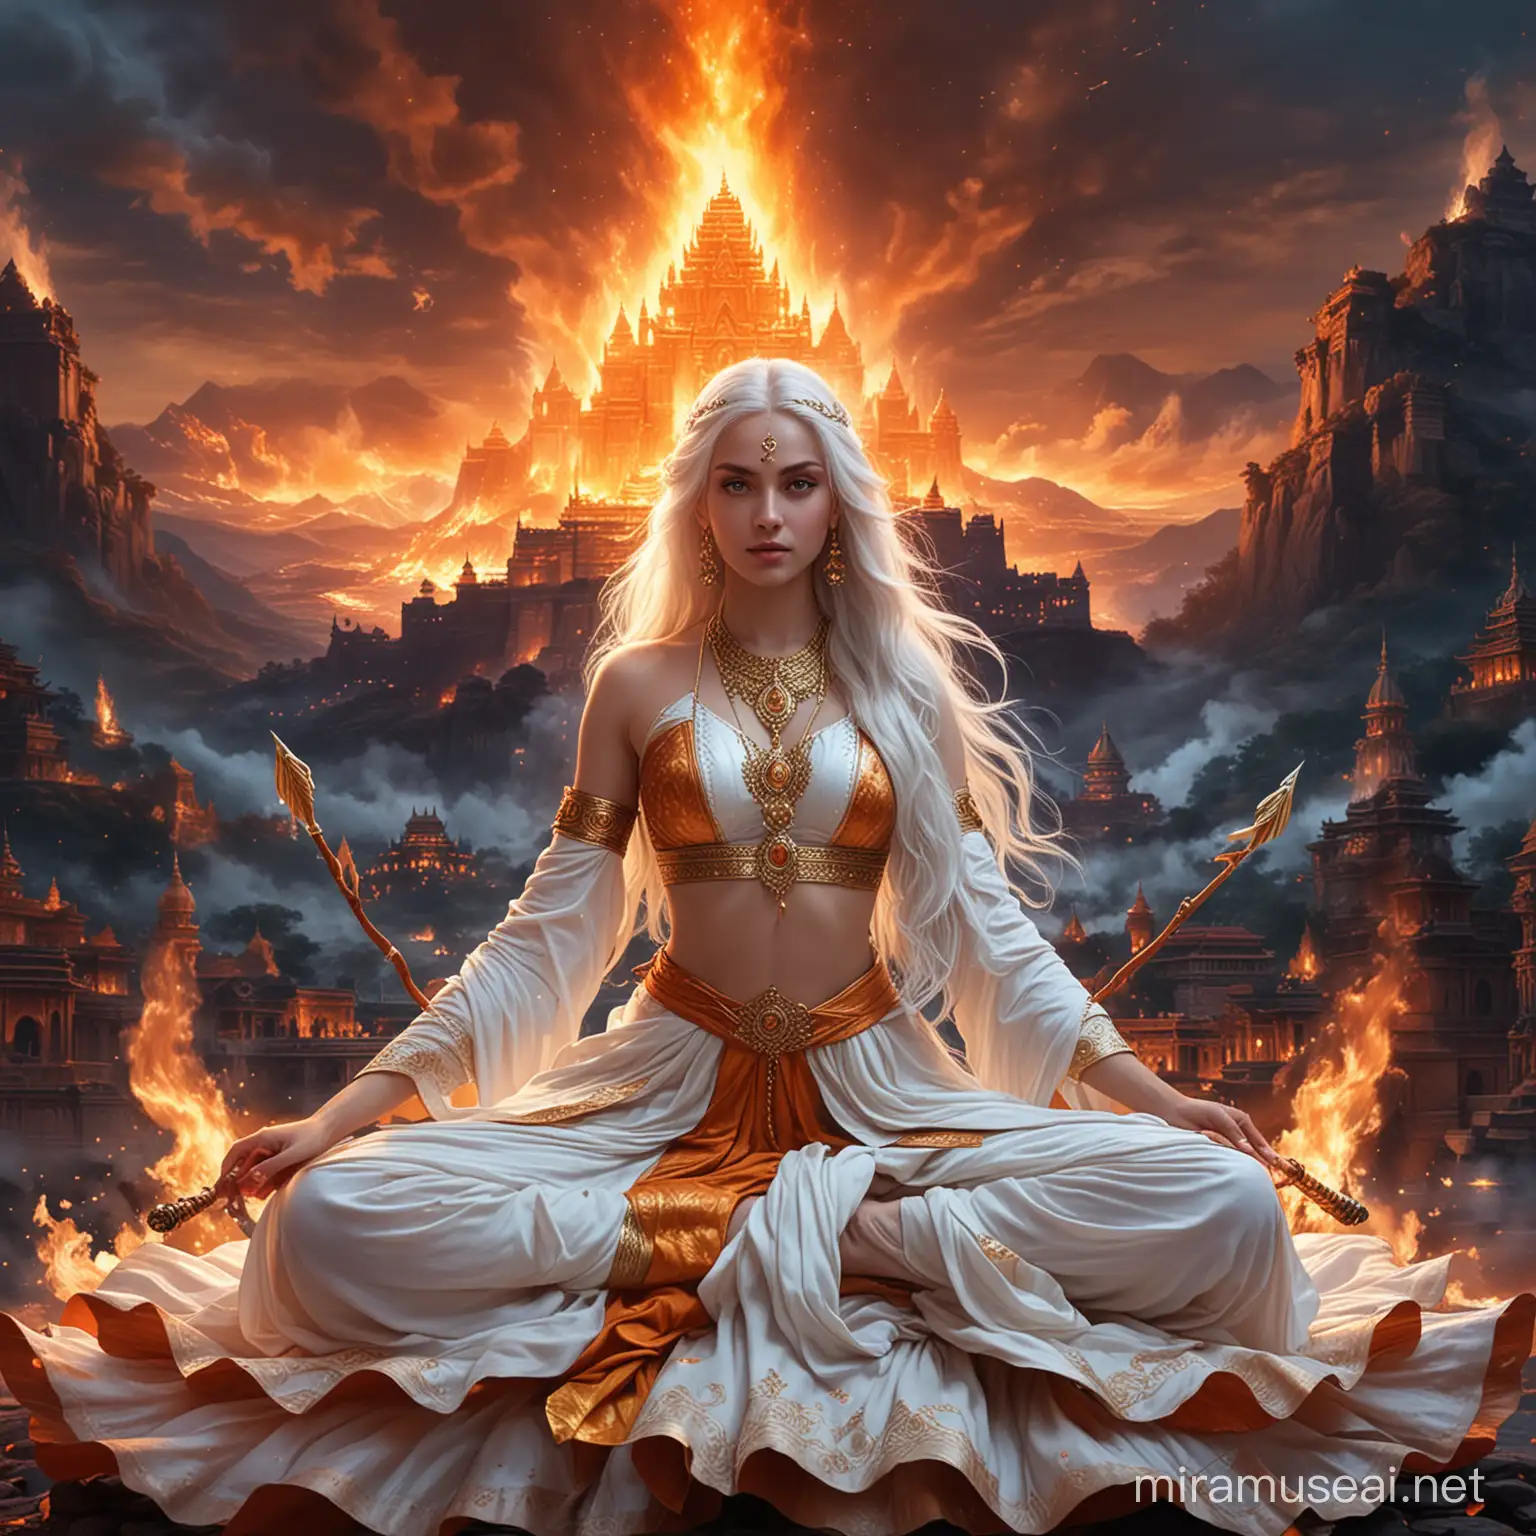 Young Empress Goddess in Hindu Combat Amidst Fire and Dark Palace